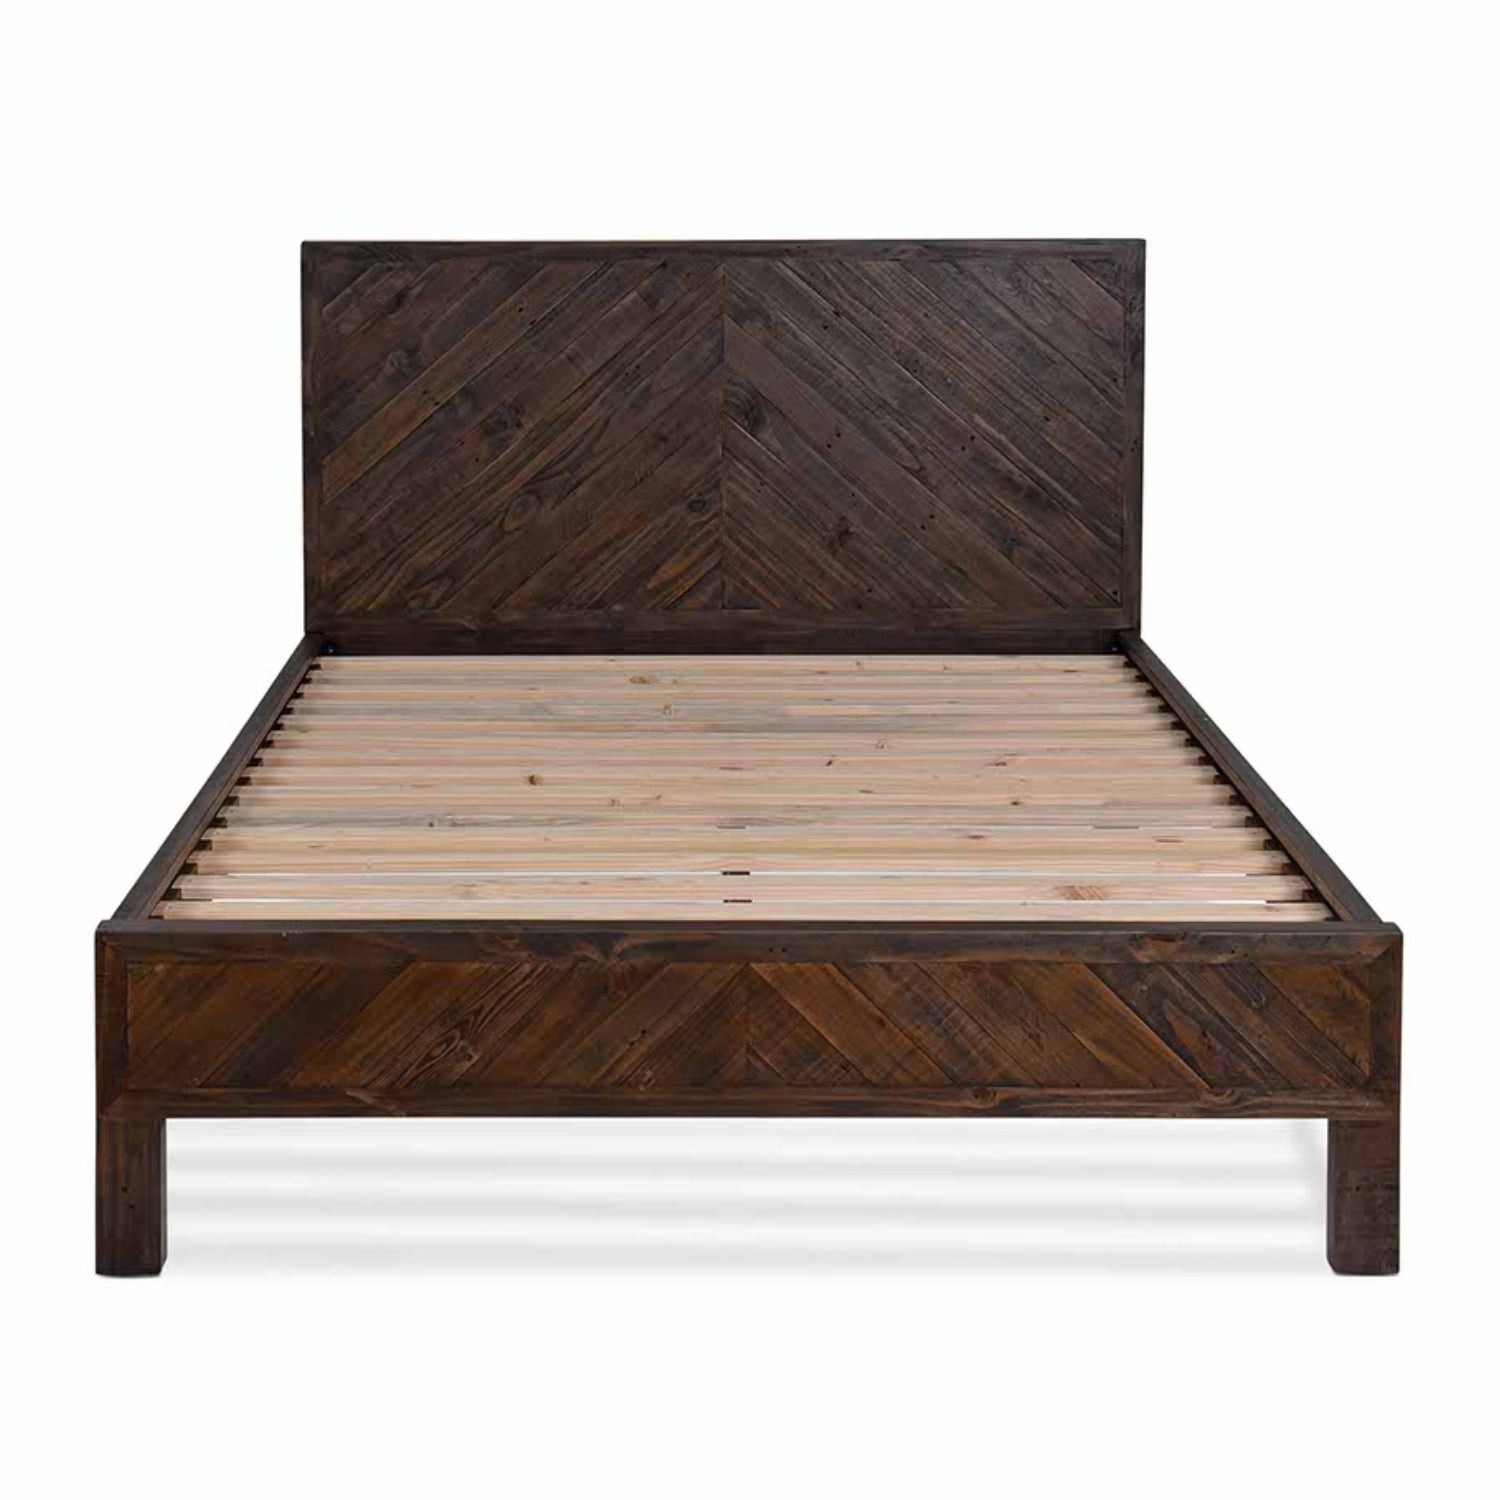 WOODEN BEDS